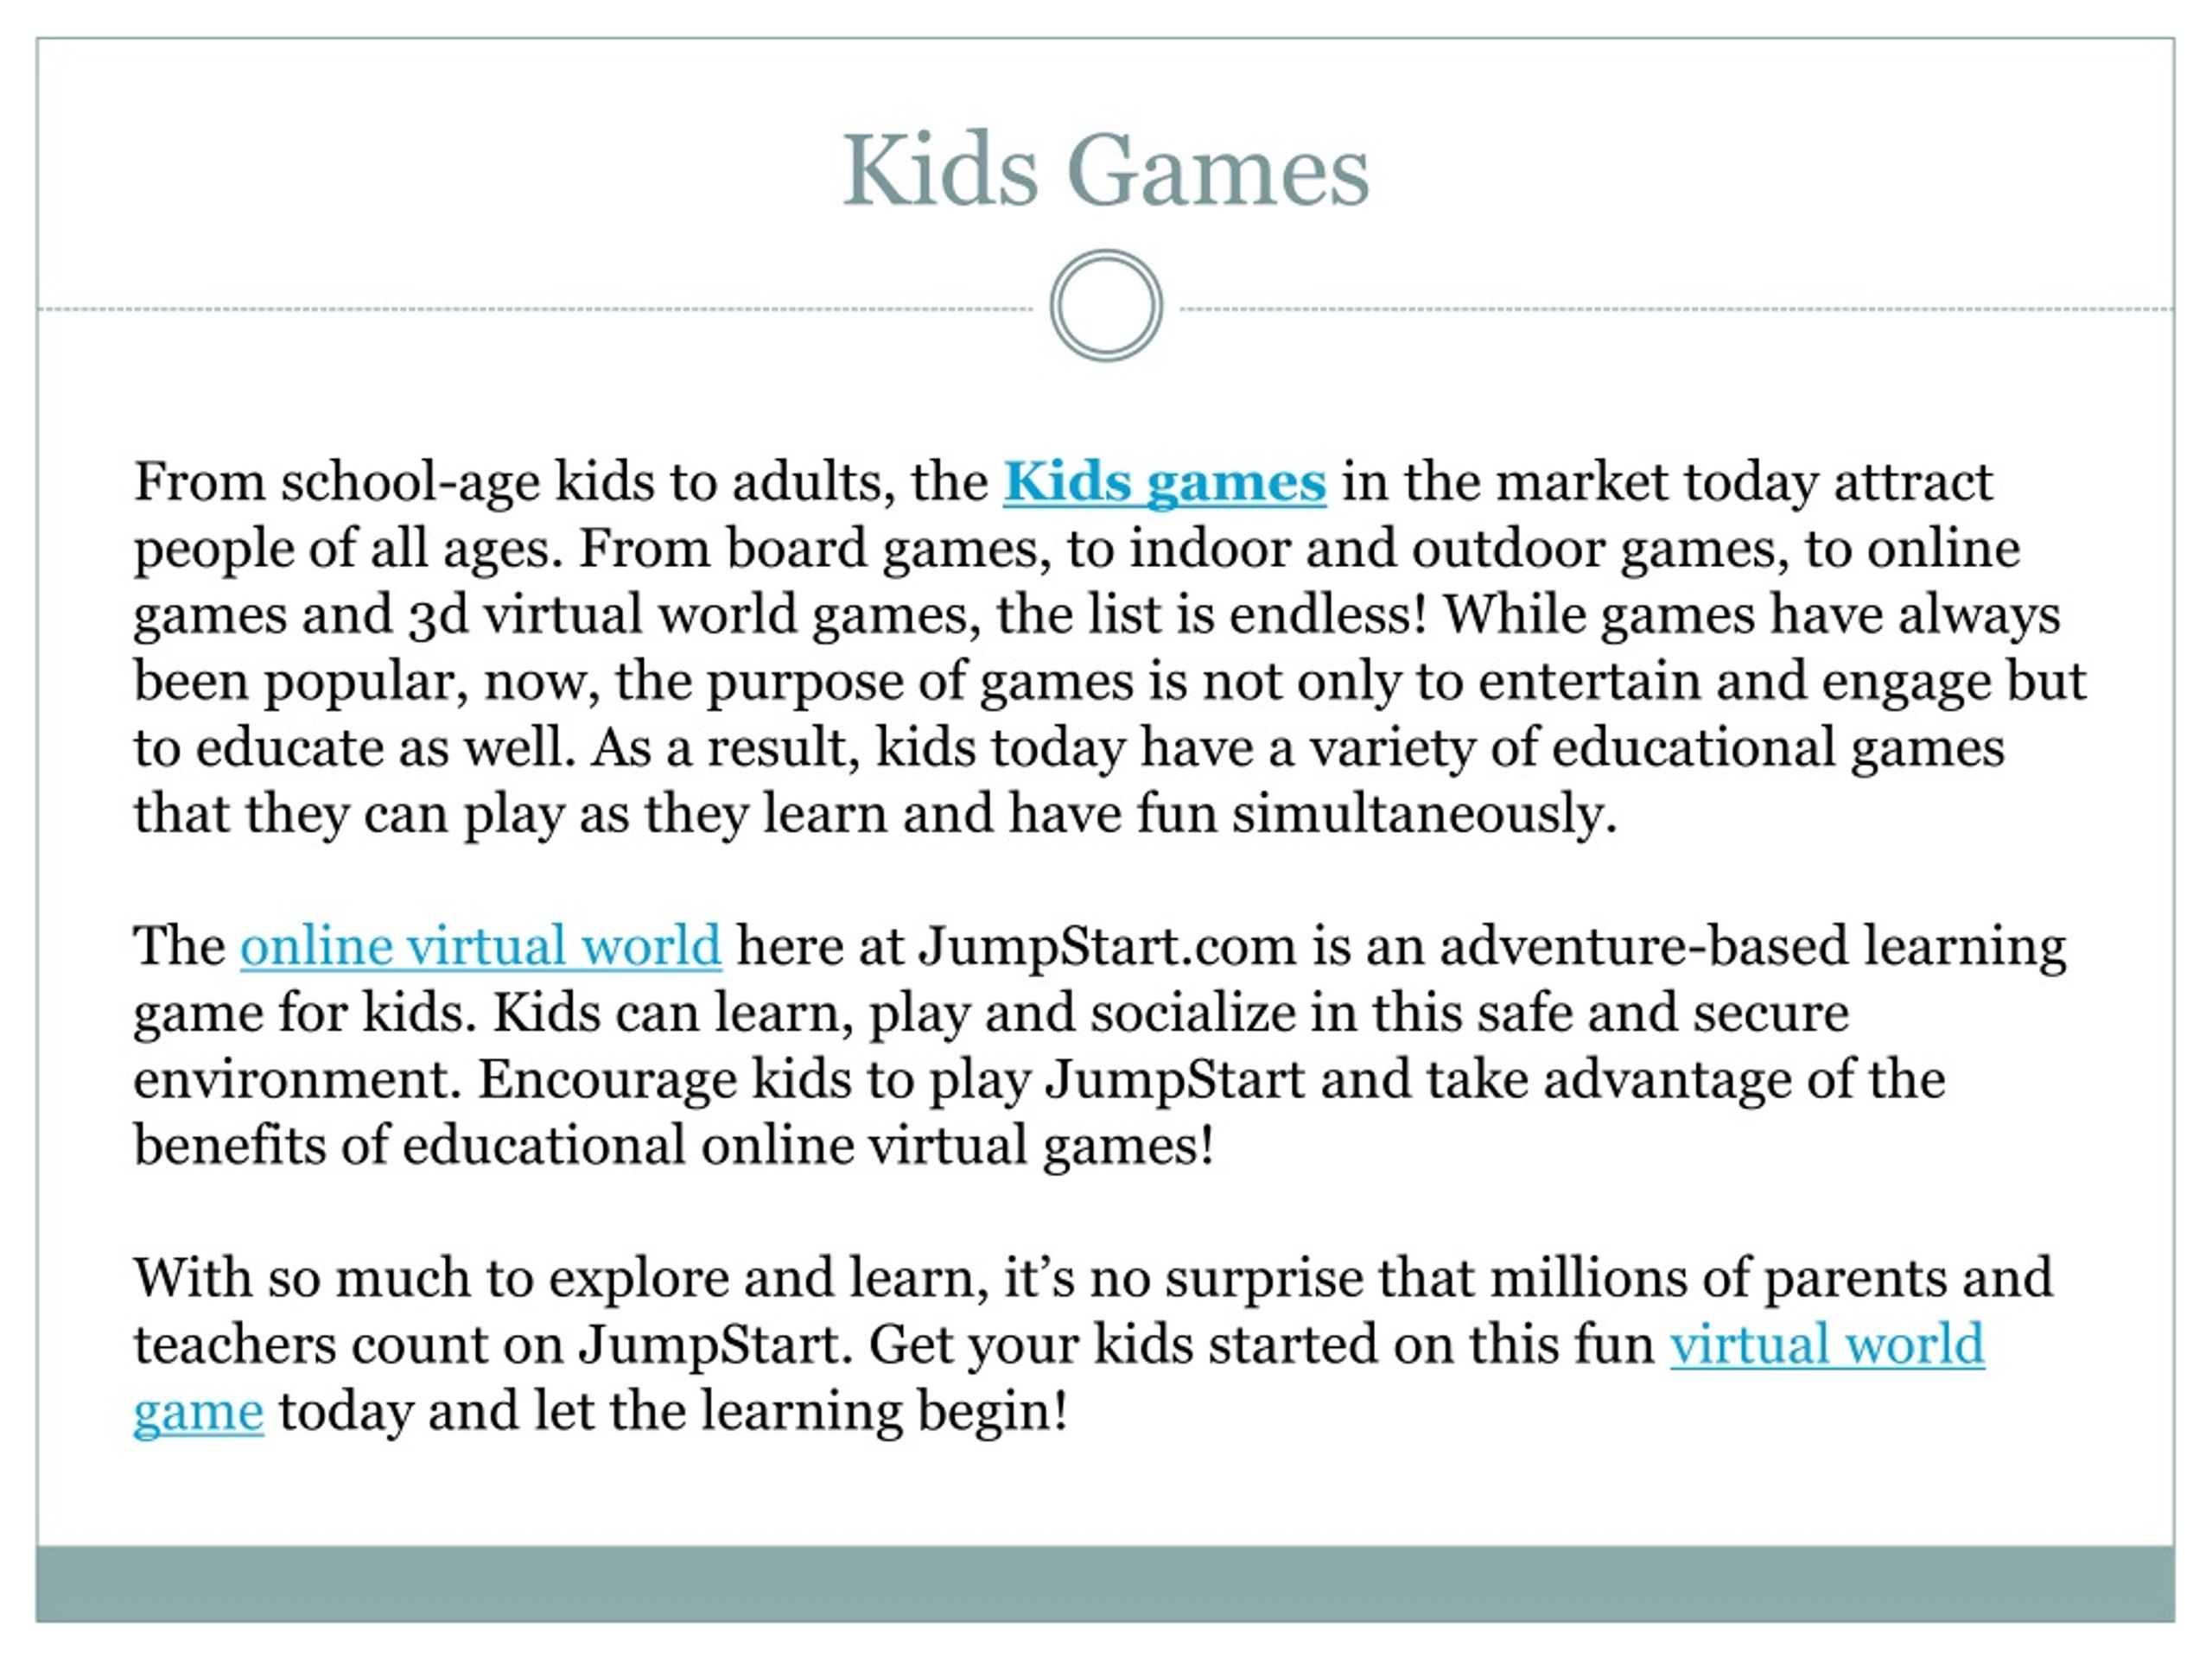 What Are the Benefits of Playing Online Games for Kids?